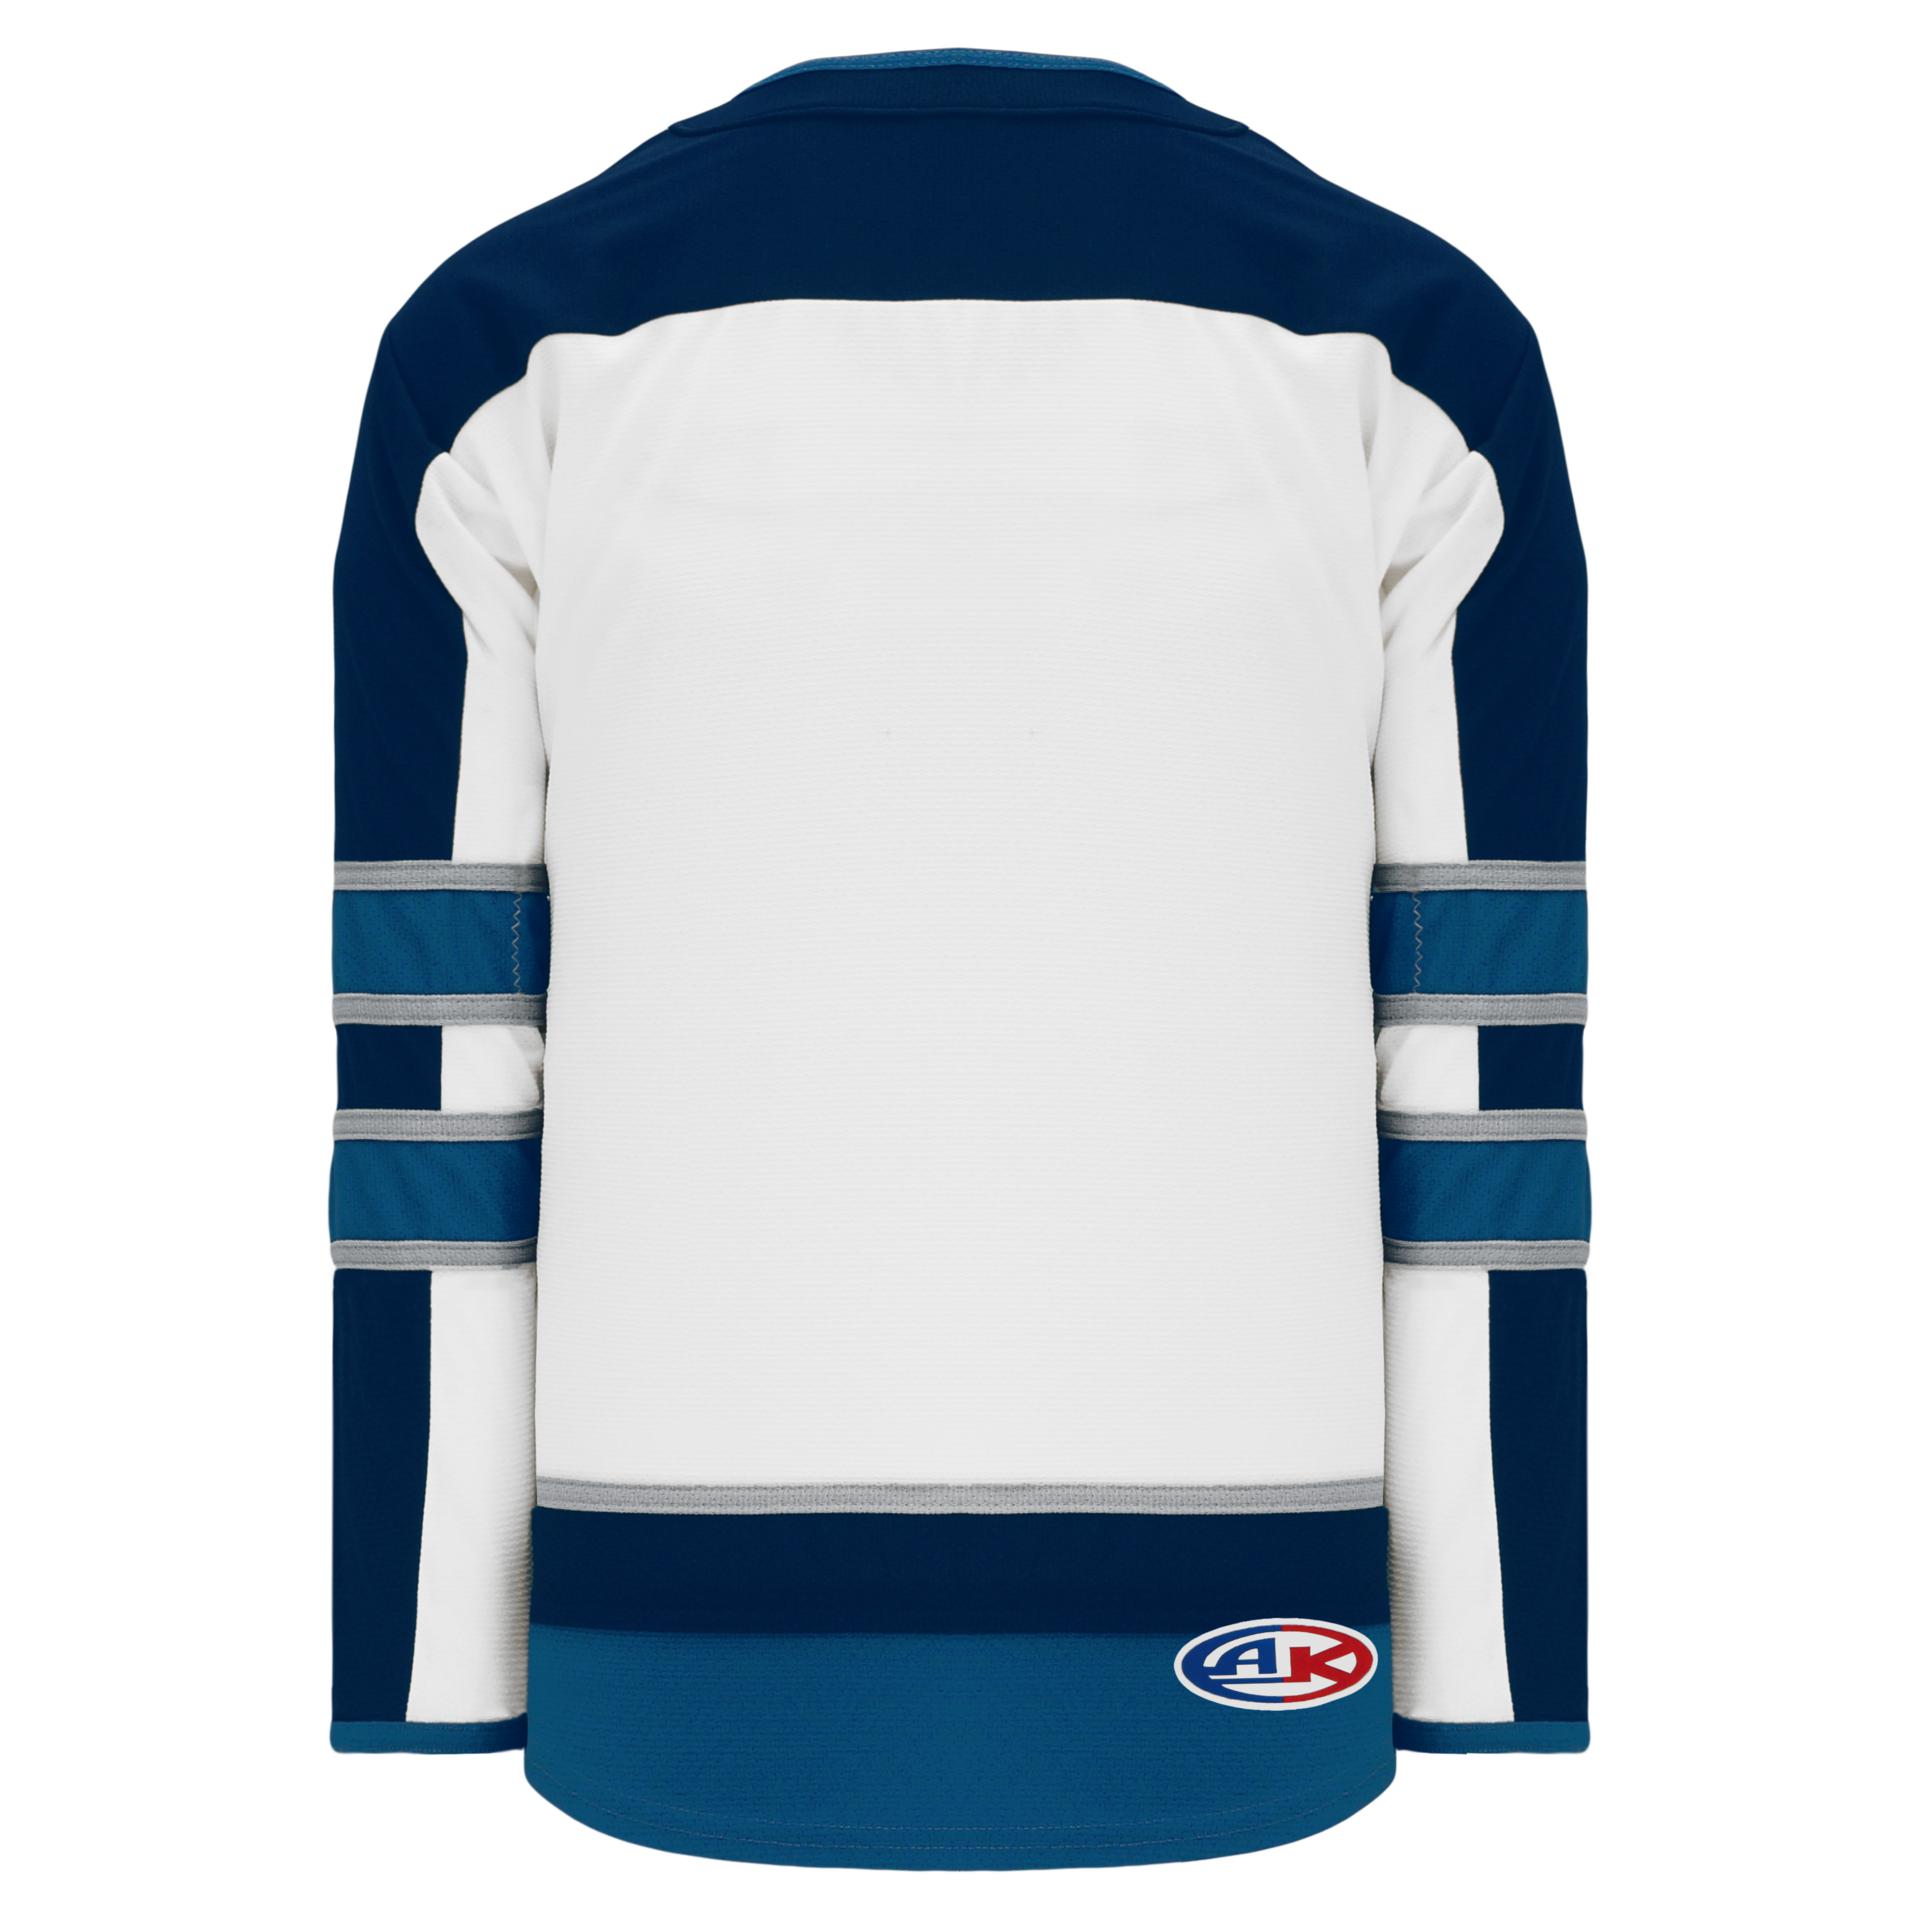 Winnipeg Jets - We can't get enough of this jersey! View